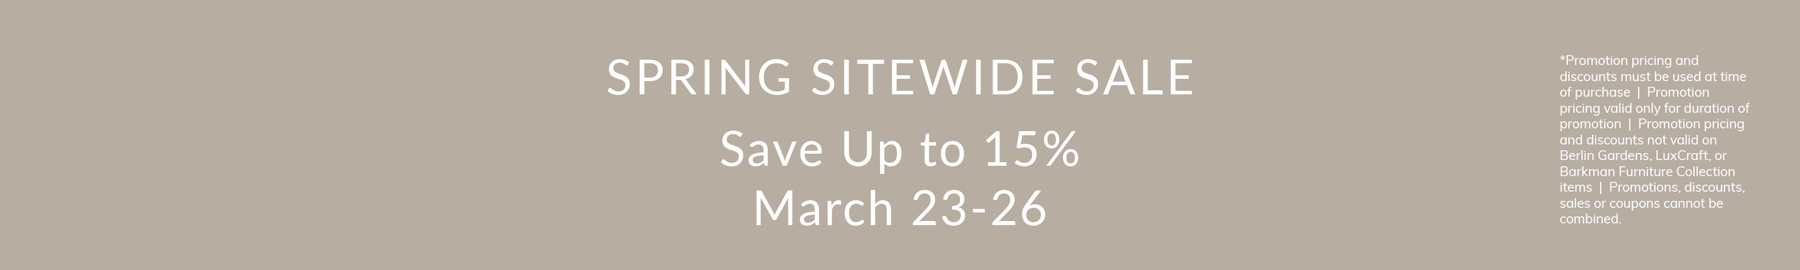 Spring Sitewide Sale